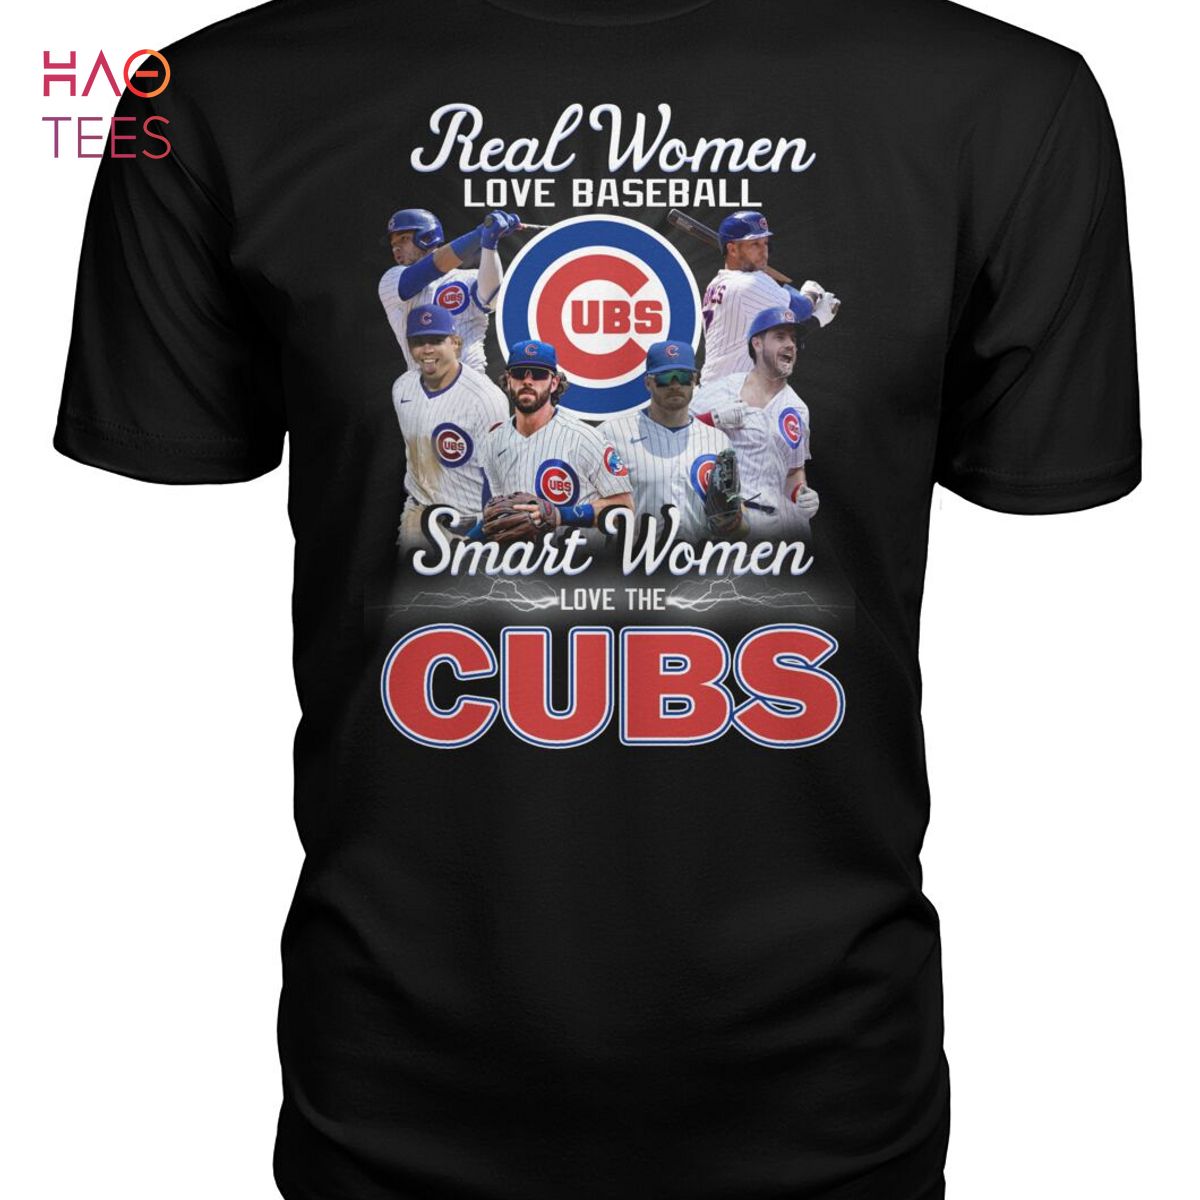 Never Underestimate A Woman Who Understands Baseball And Loves Chicago Cubs  UBS T Shirt